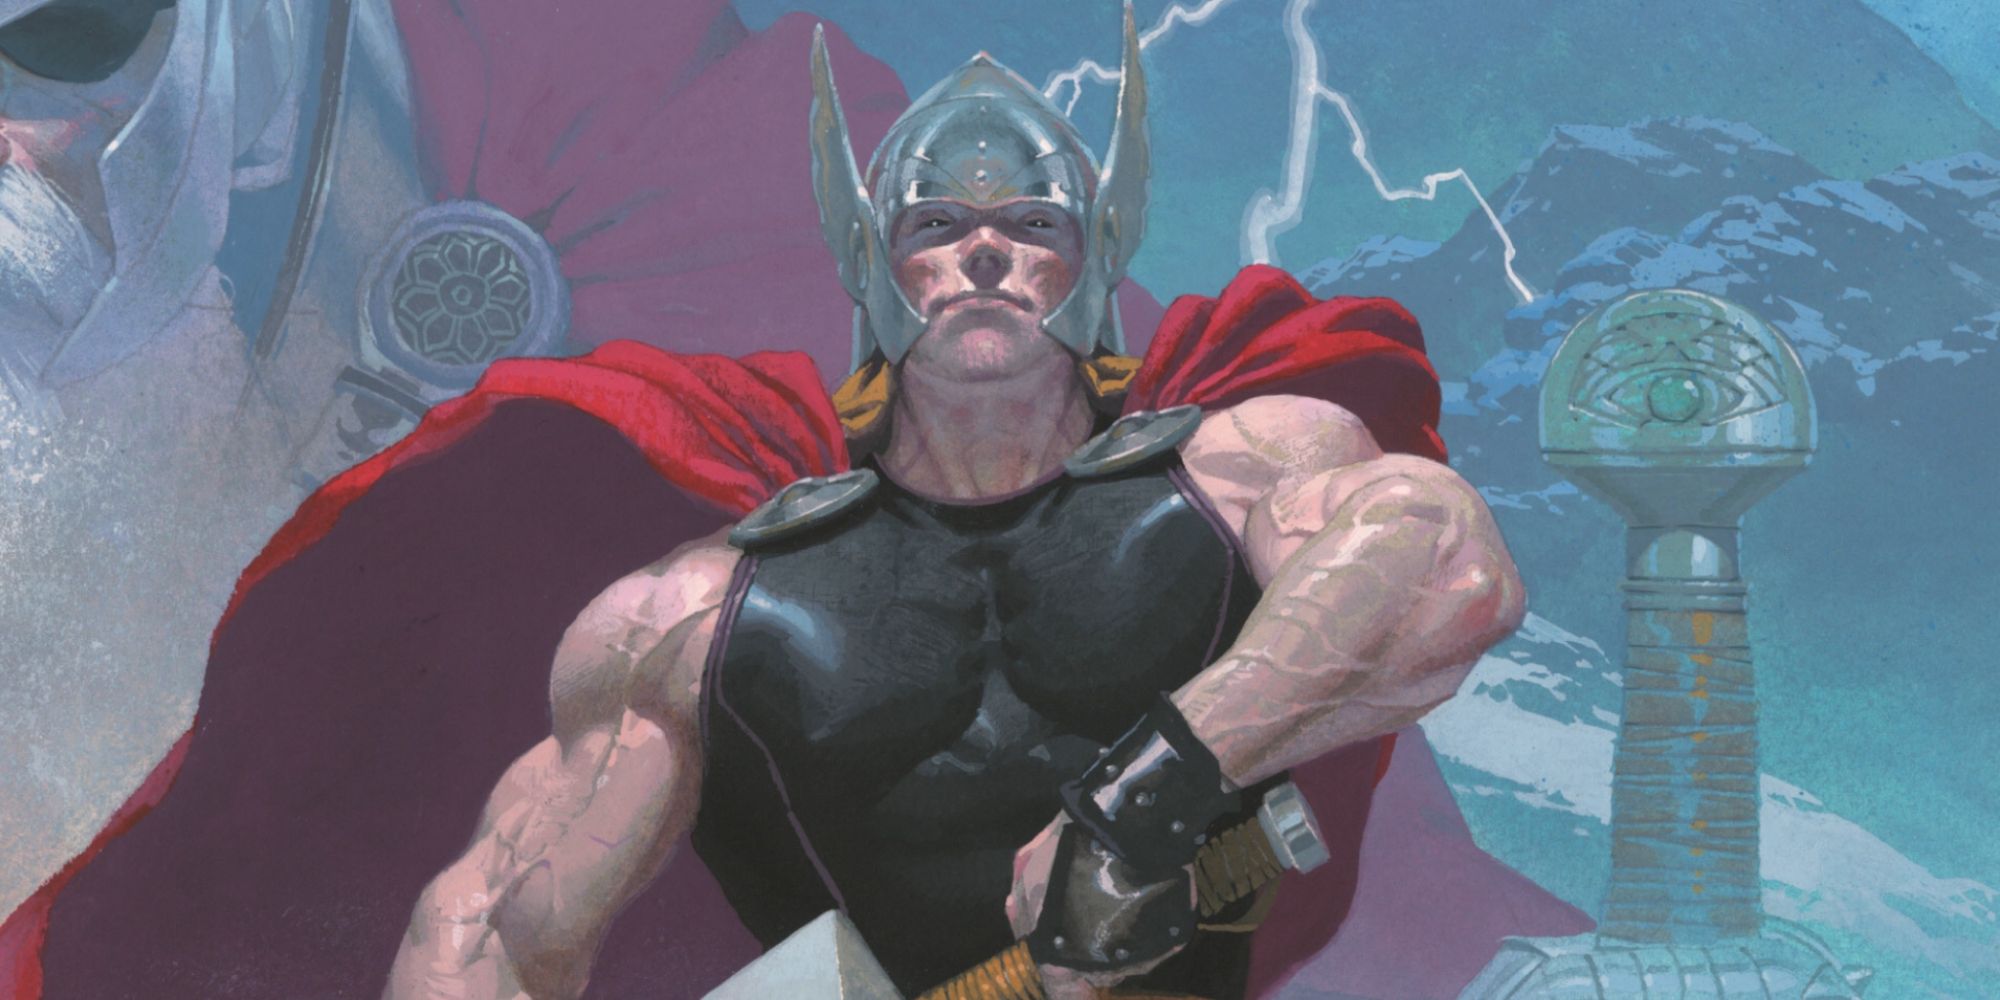 Future King Thor portrait over looking present Thor full figure.